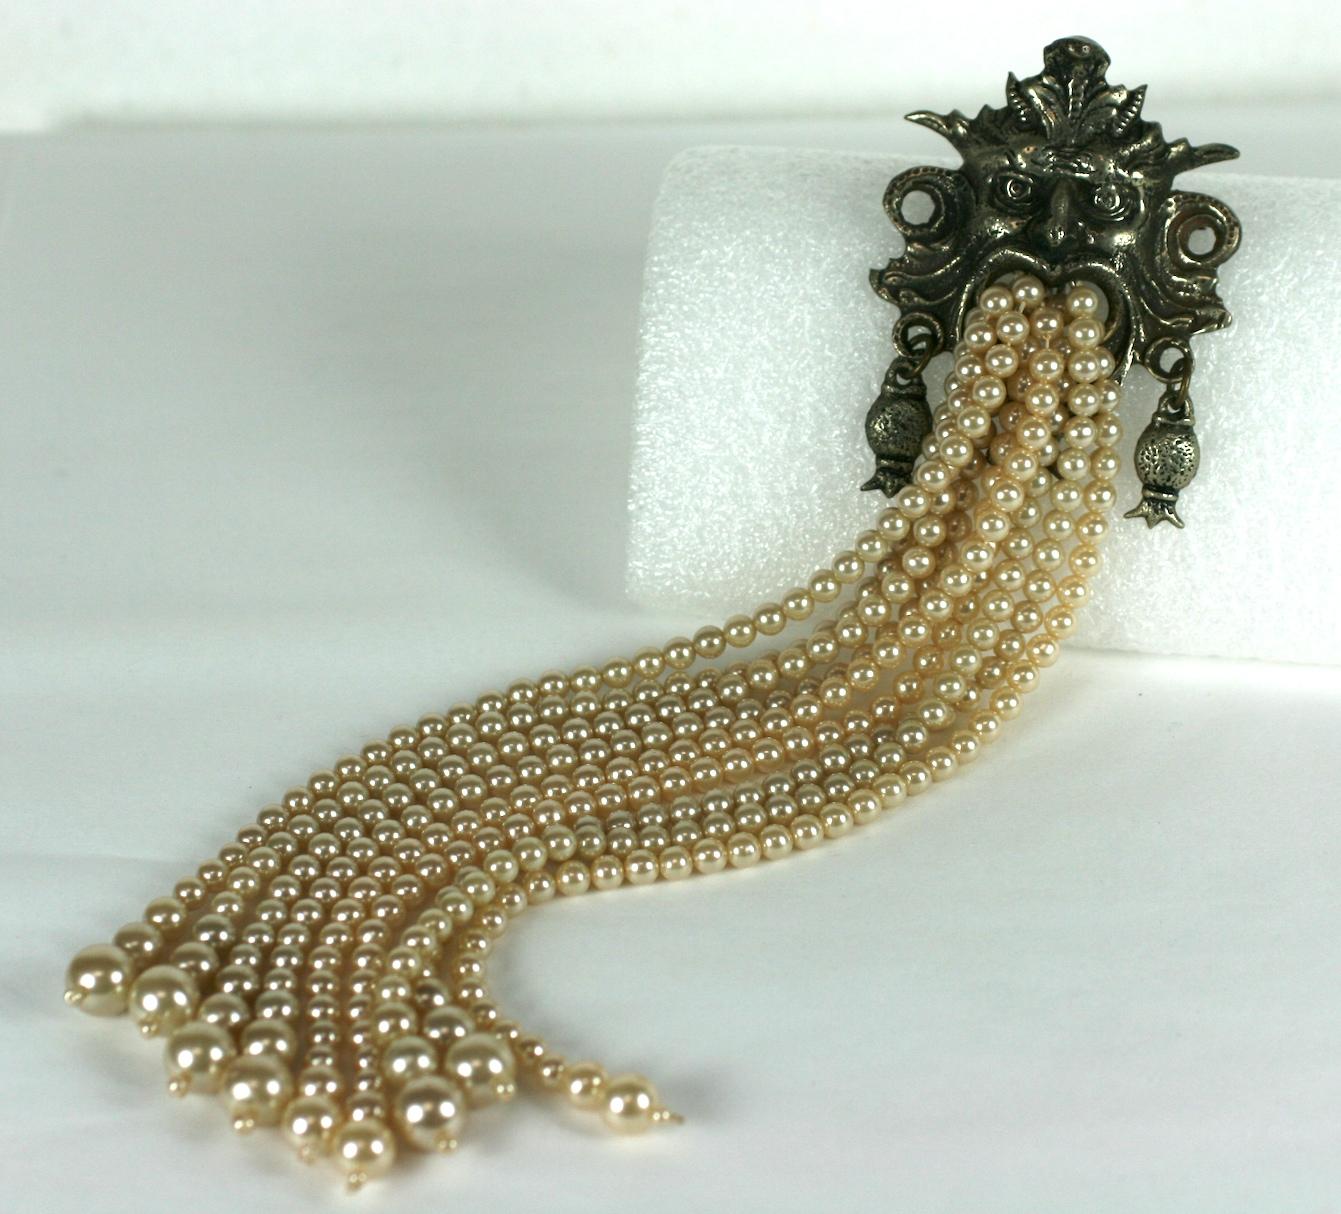 Massive Neptune fountain head brooch of antique silver plated base metal. With the head of Neptune spitting multiple strands of  graduated faux pearls. Accented with articulated long lantern like earrings.
Excellent Condition, Signed Italy. 
Length